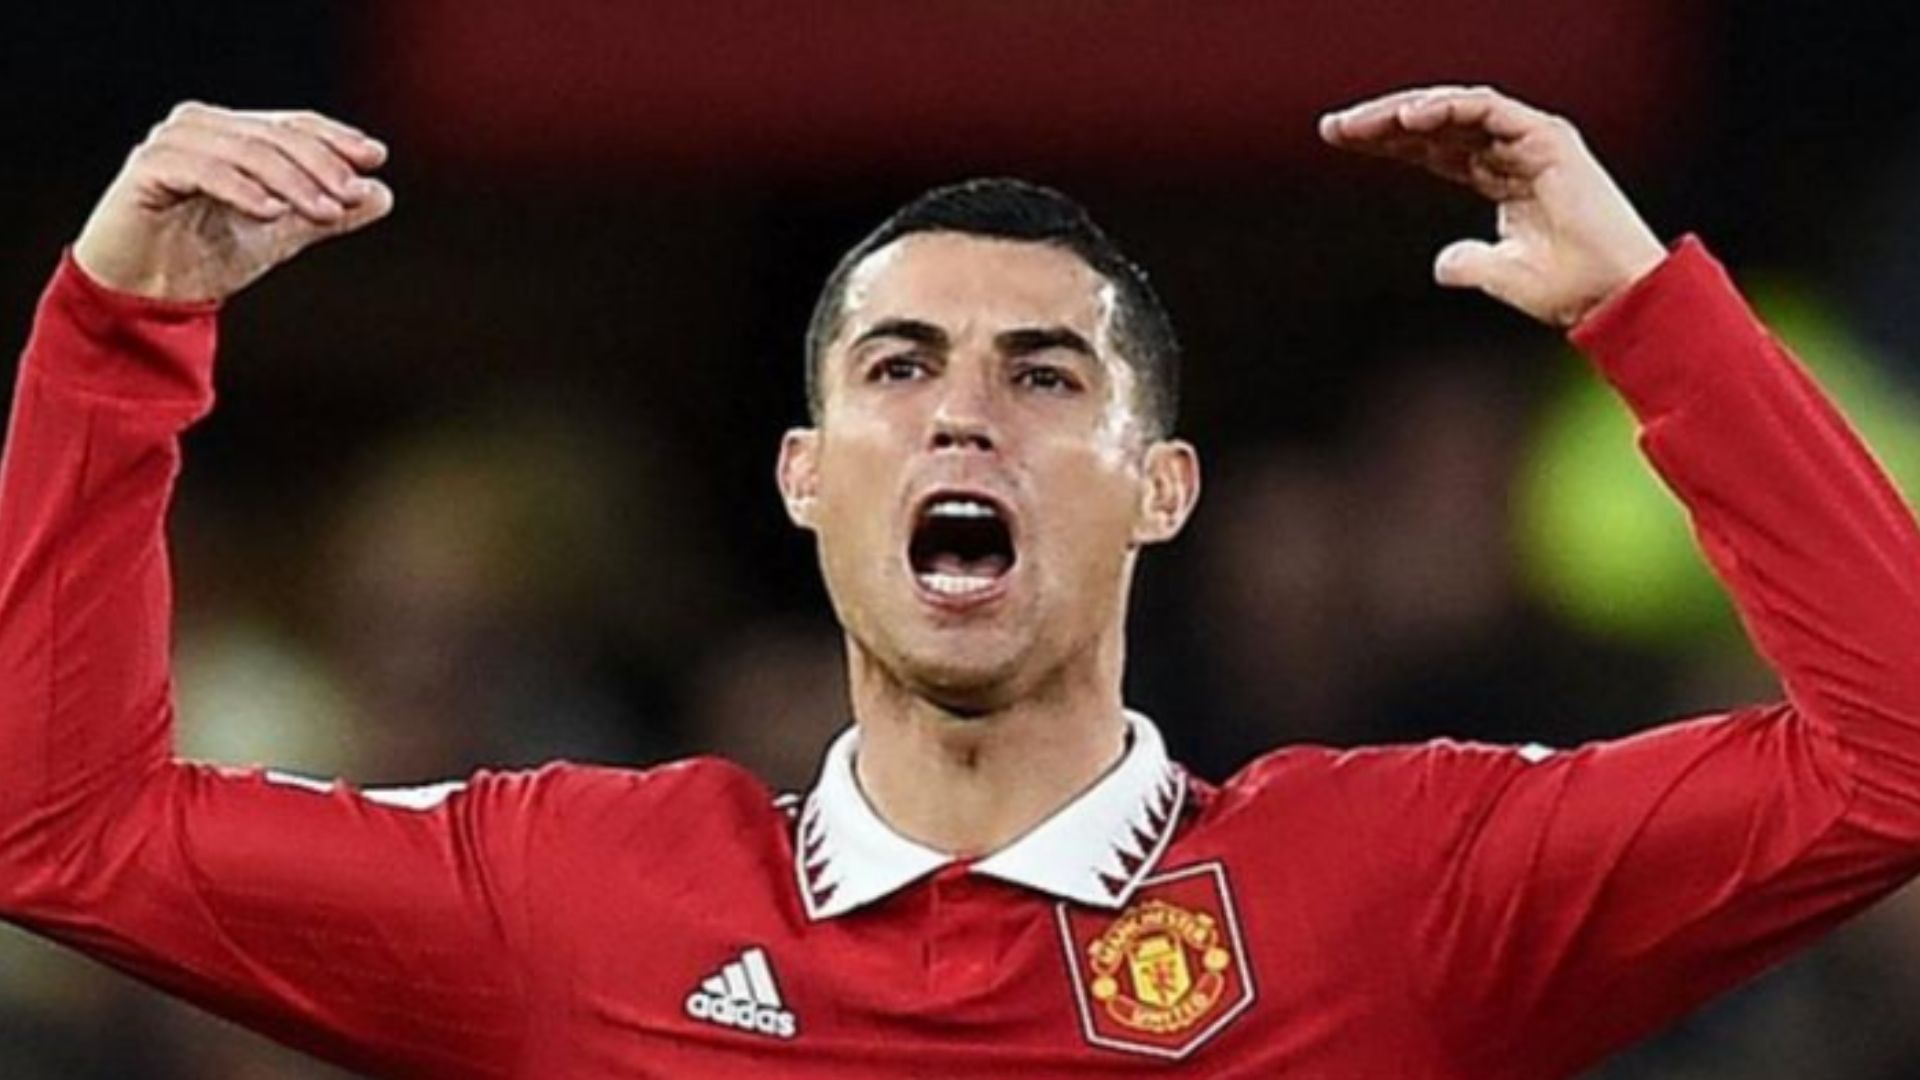 Cristiano Ronaldo states he feels 'betrayed by Manchester United